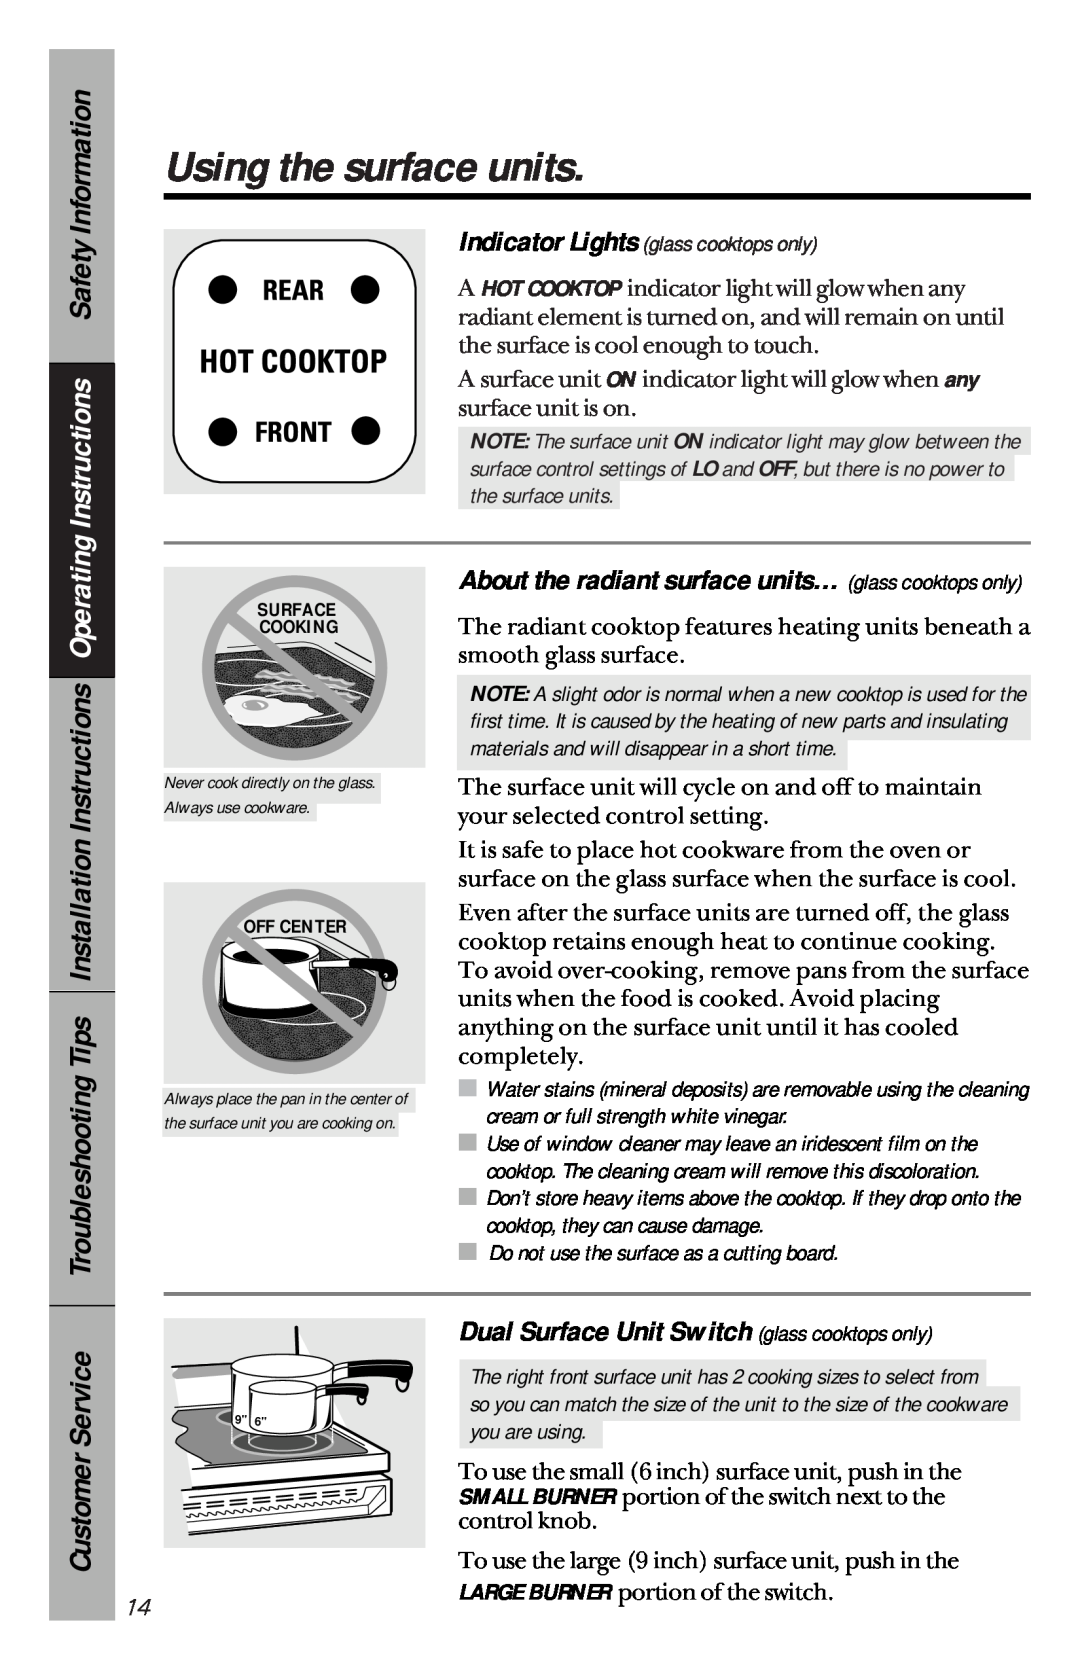 GE 49-8827 Instructions Safety Information, Dual Surface Unit Switch glass cooktops only, Using the surface units, Service 